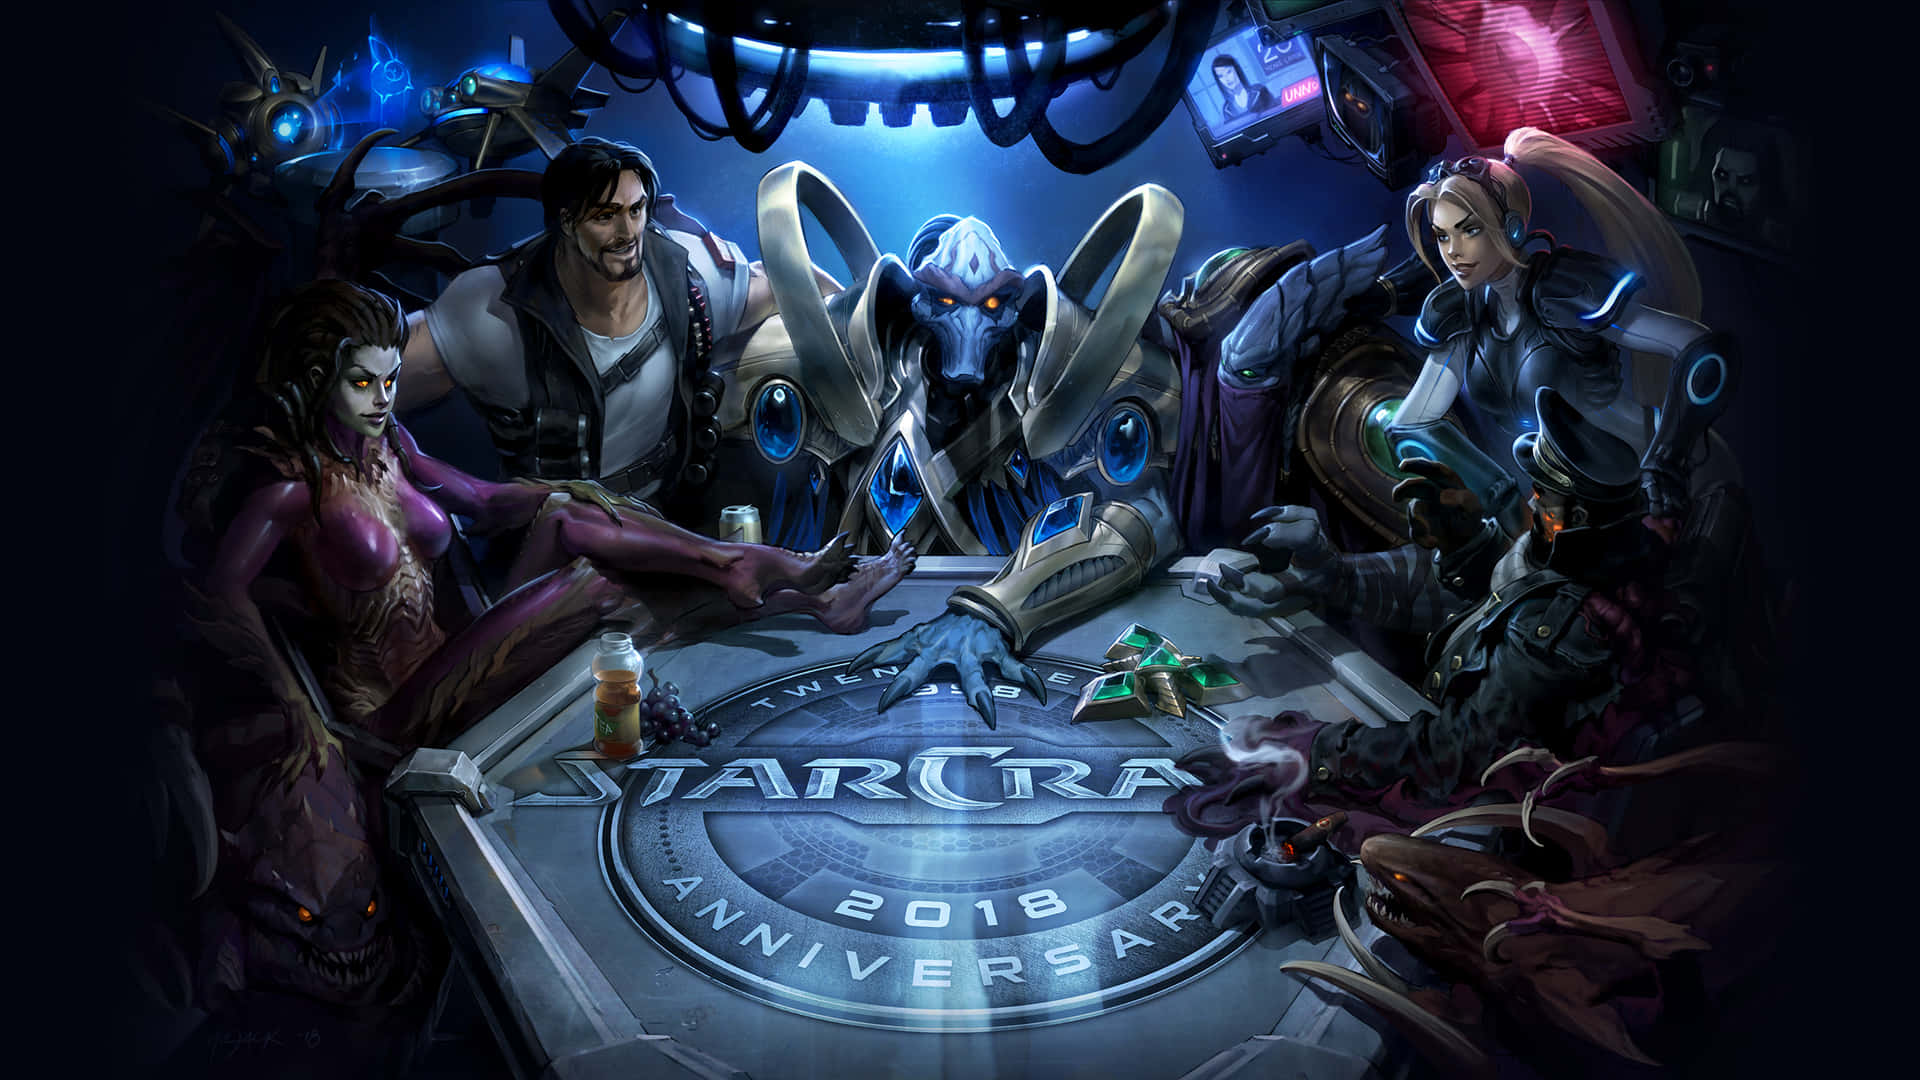 Epic Battle Scene with Iconic StarCraft Characters Wallpaper